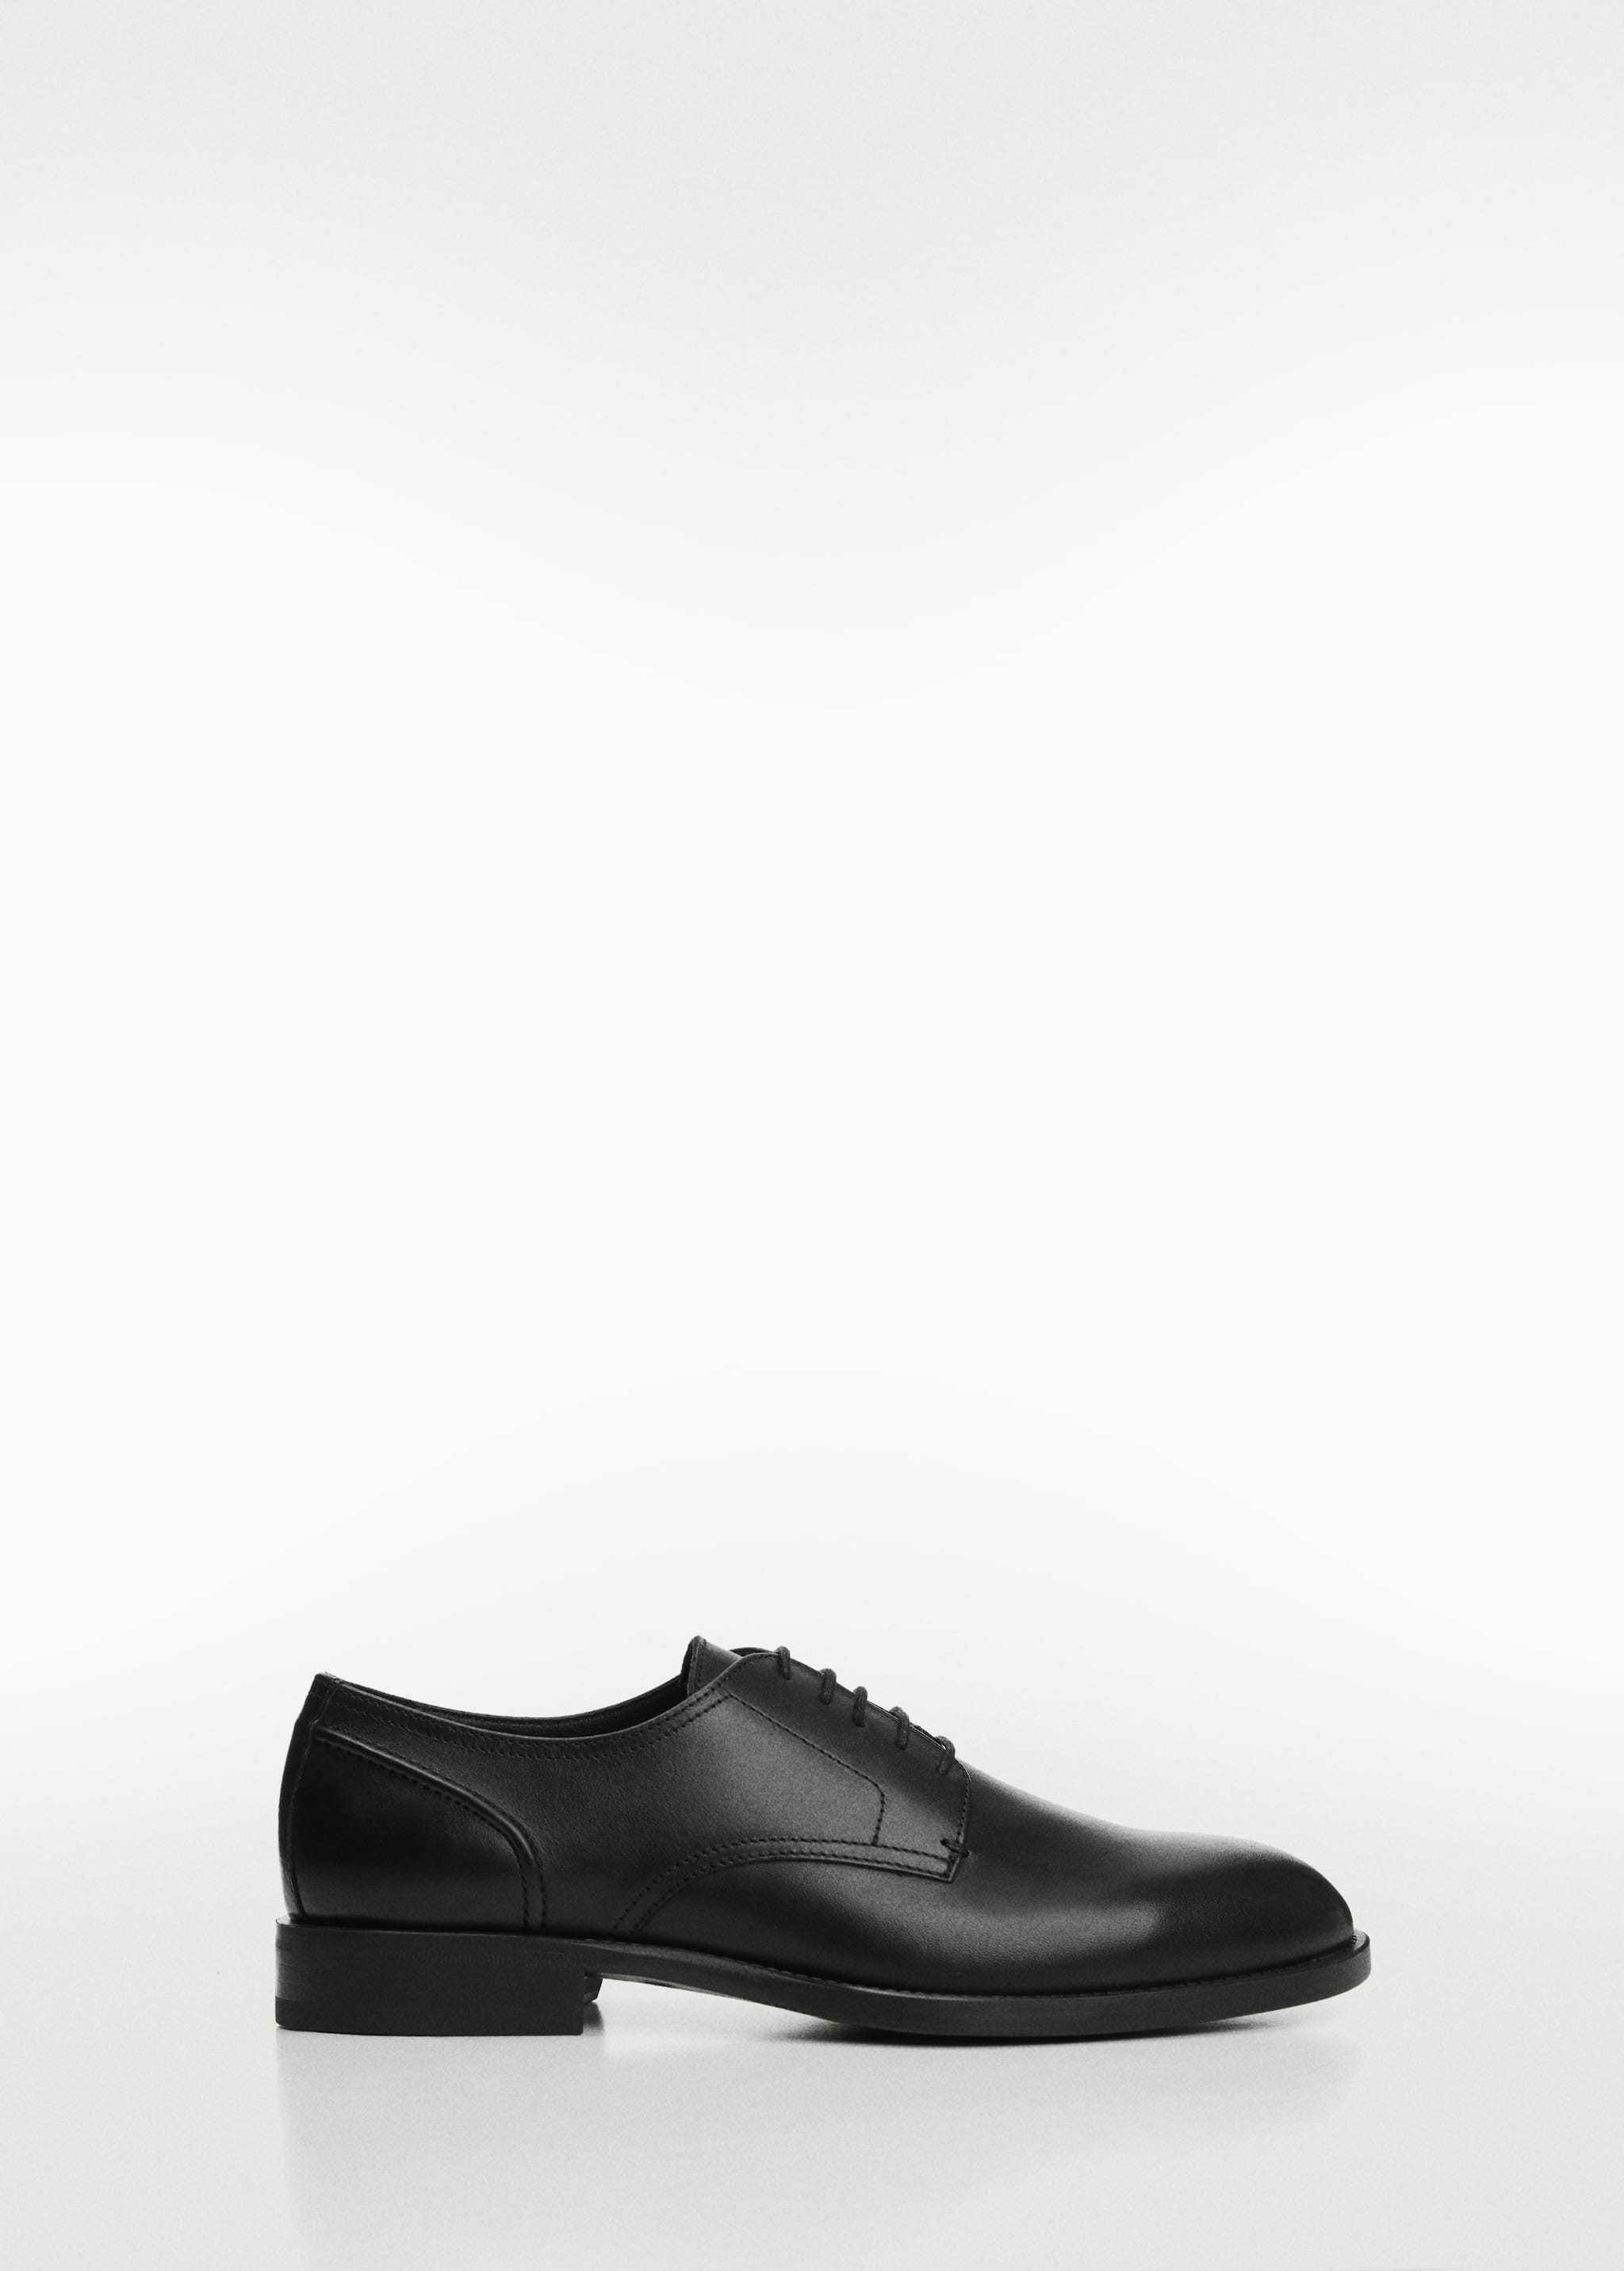 Leather suit shoes - Article without model